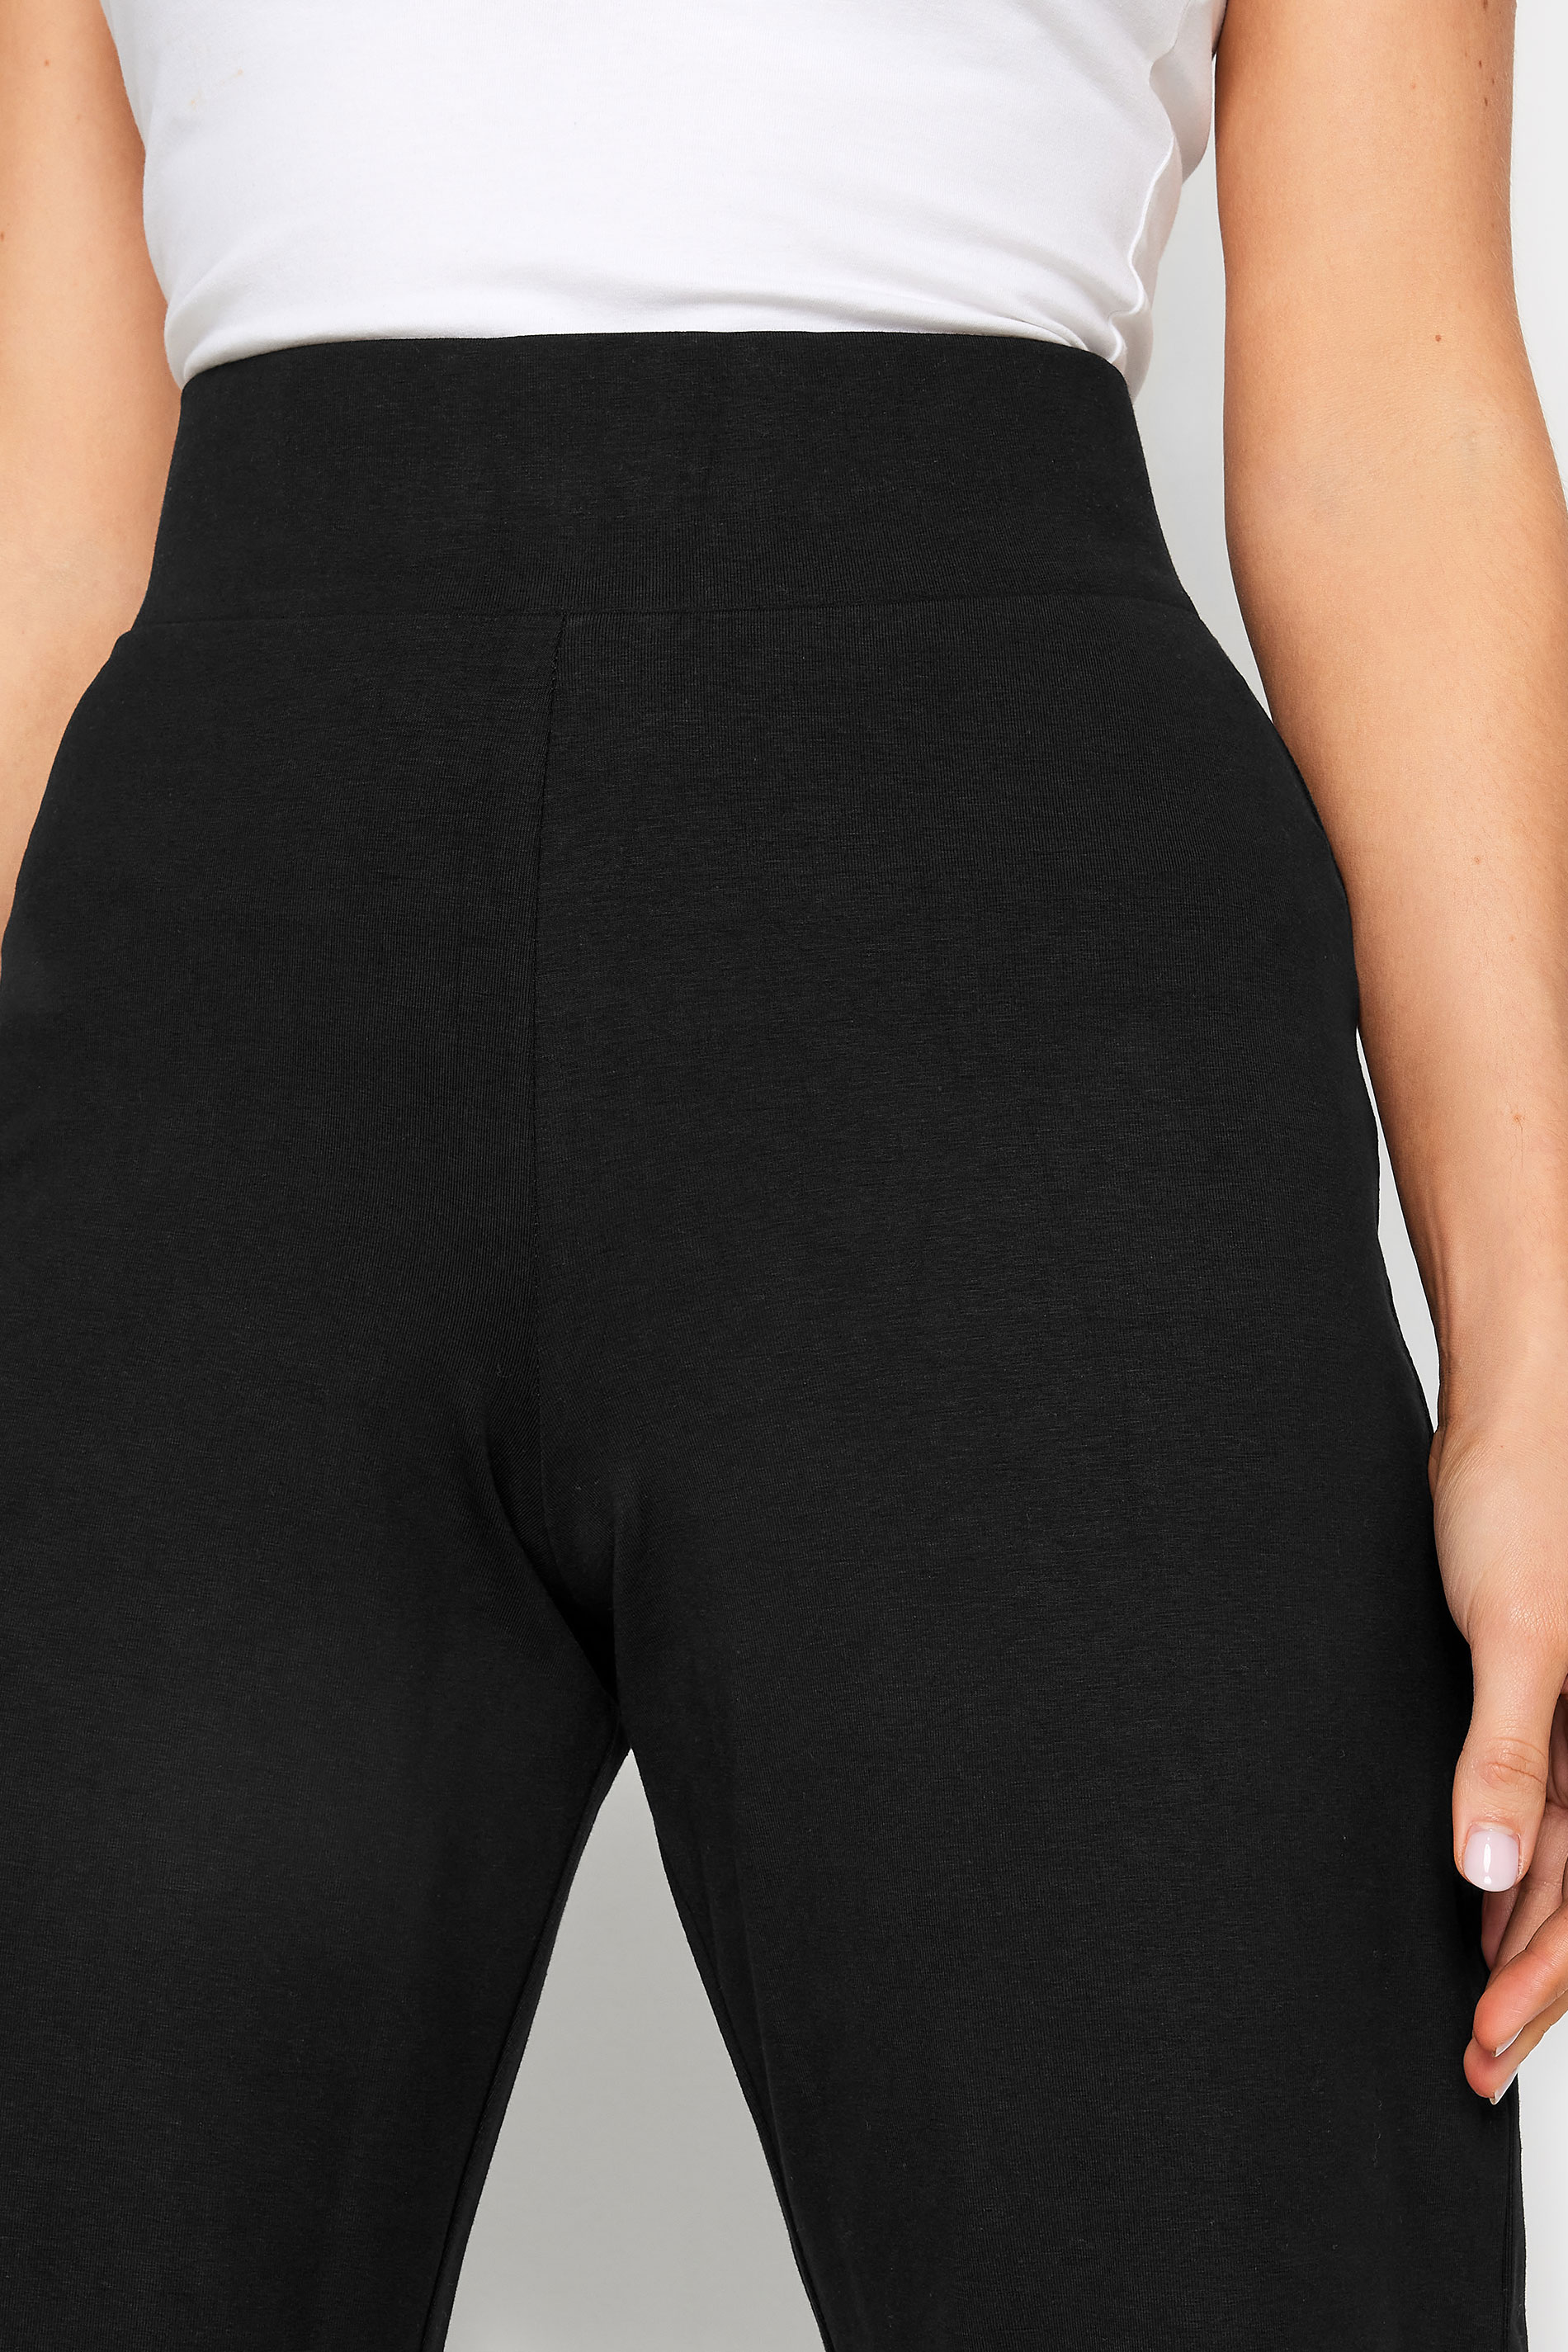 Tall Plus Size Yoga Pants For Women